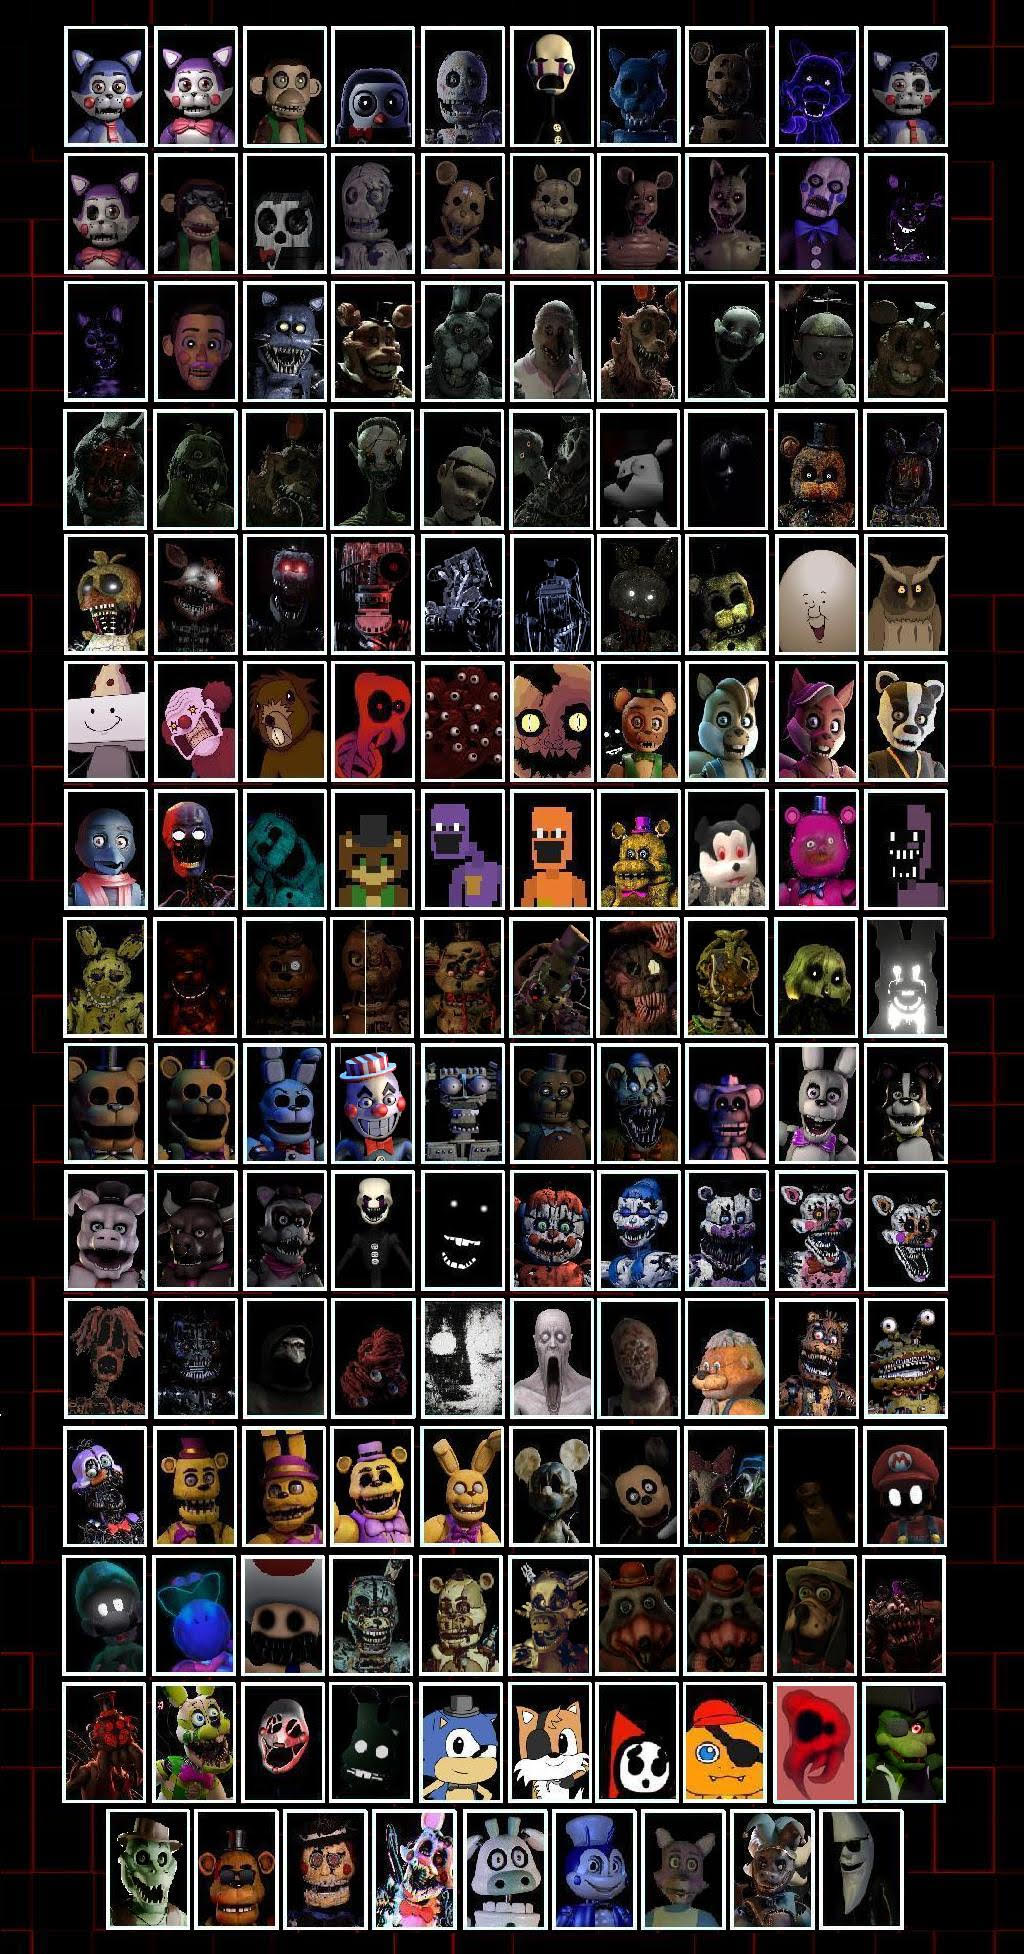 Top 10 FNAF Characters by GoddessAriea on DeviantArt